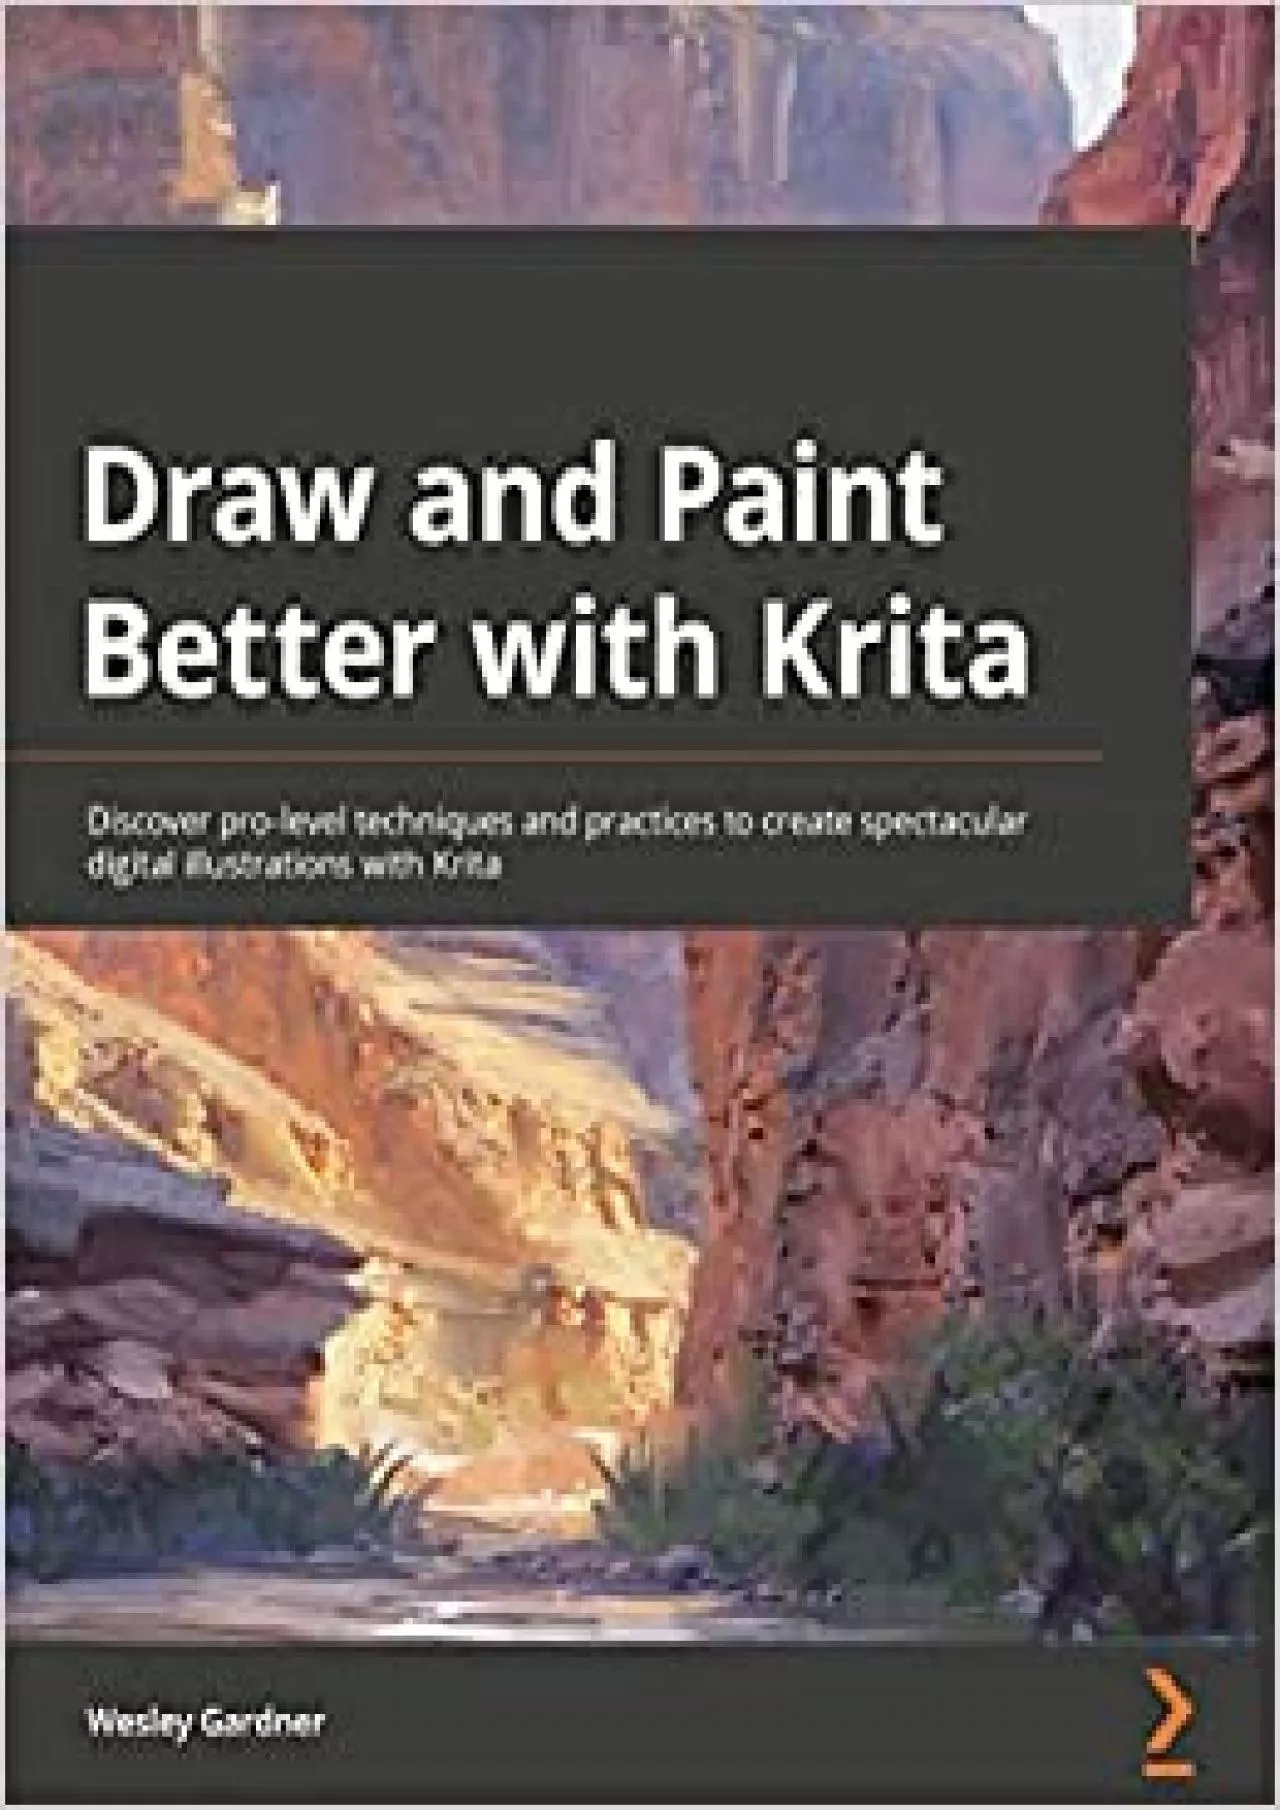 (EBOOK)-Draw and Paint Better with Krita Discover pro-level techniques and practices to